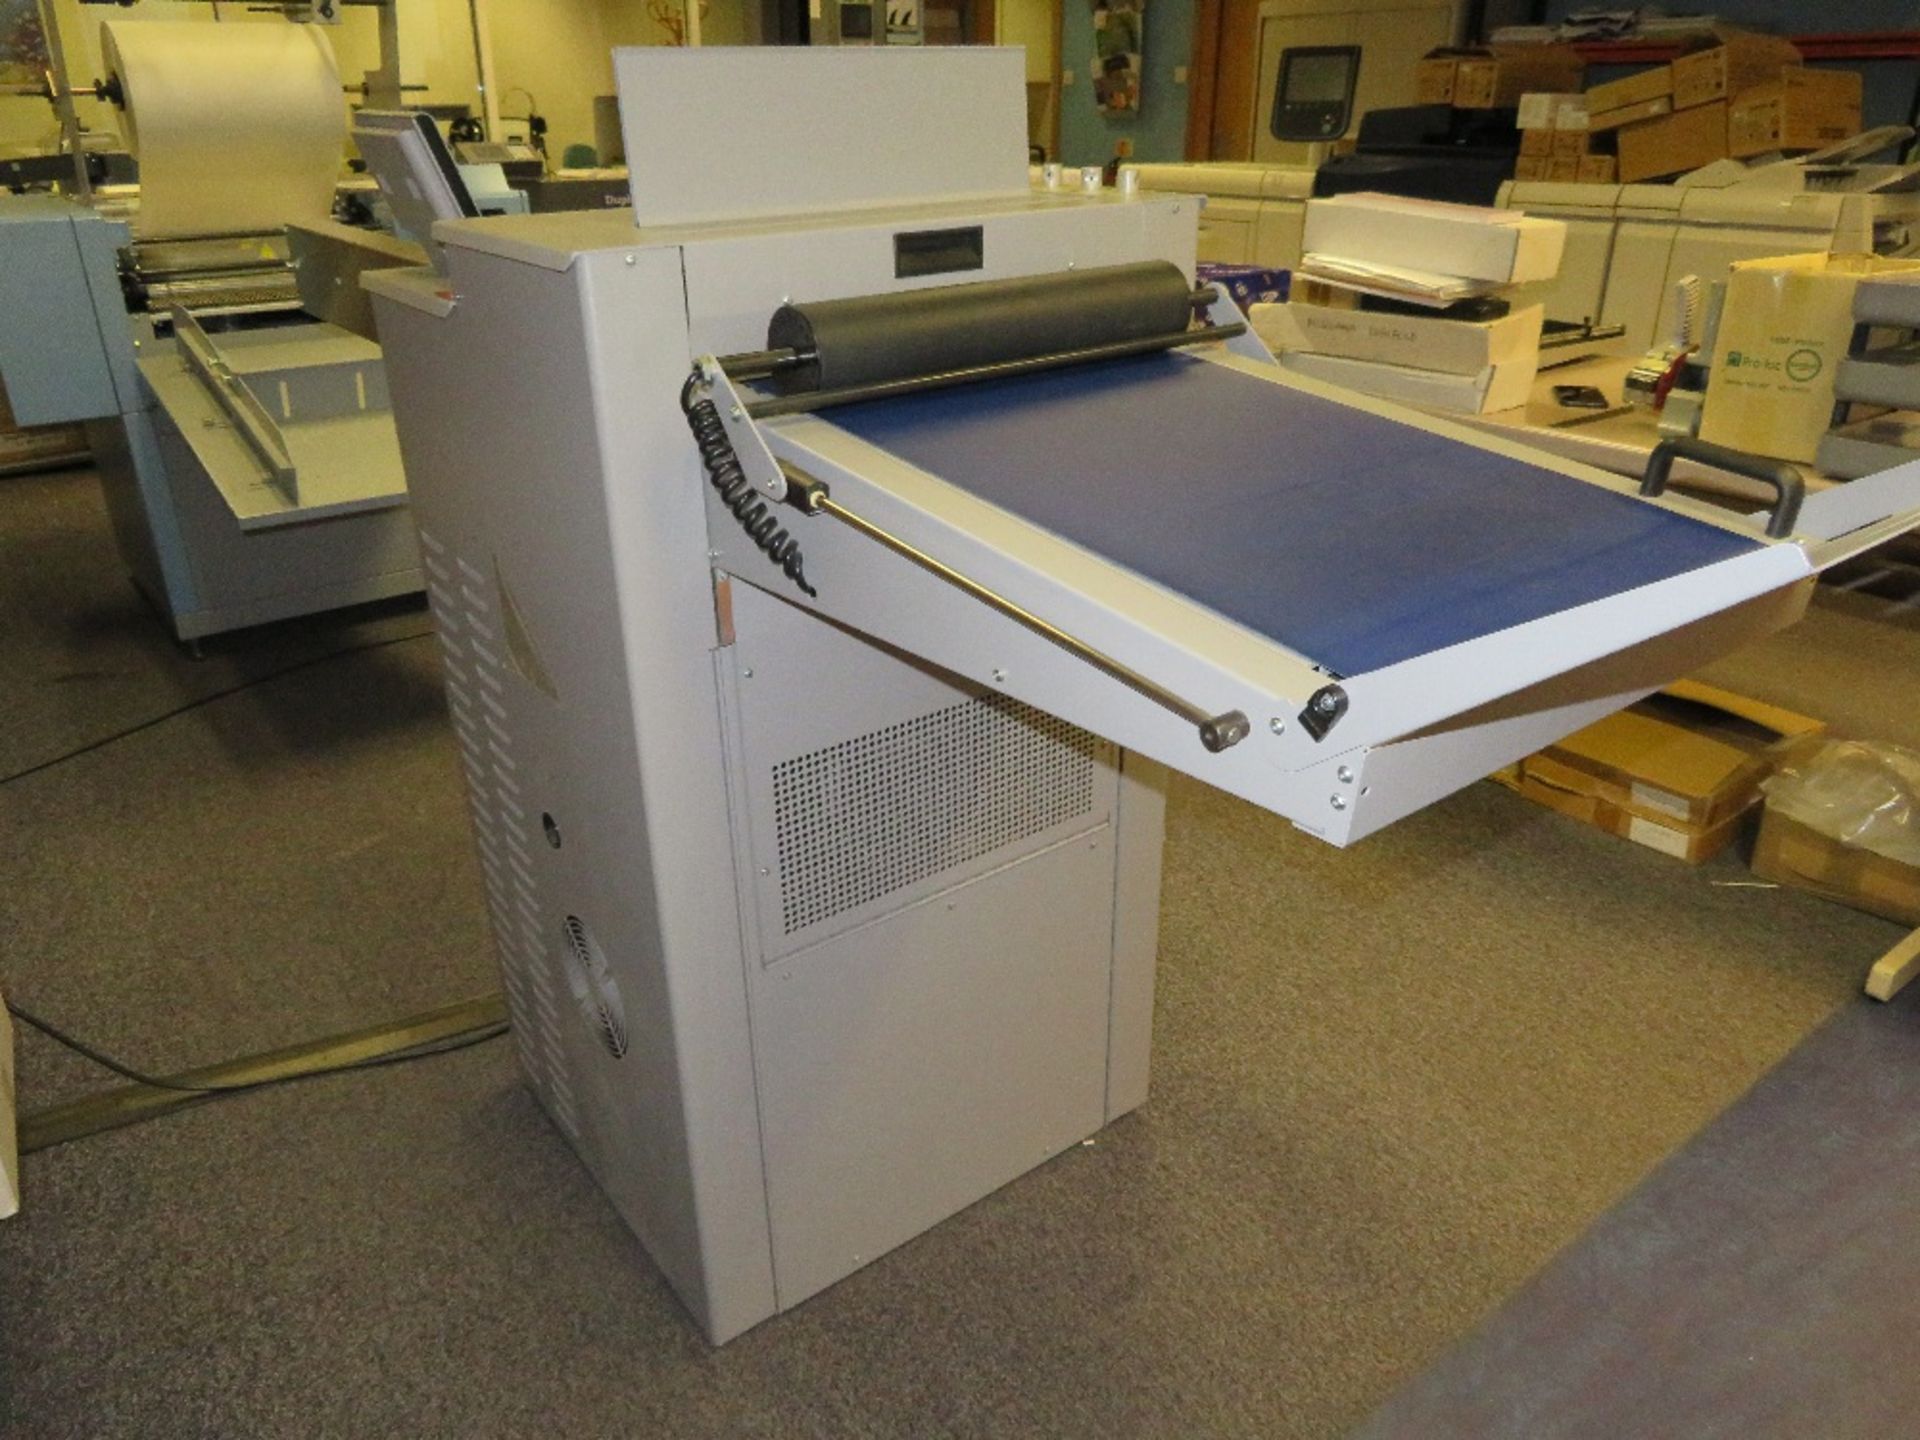 Morgana Model Digifold Pro 1708203S (CB) Creasing and Folding Machine, Serial No. 600895 - Image 5 of 6